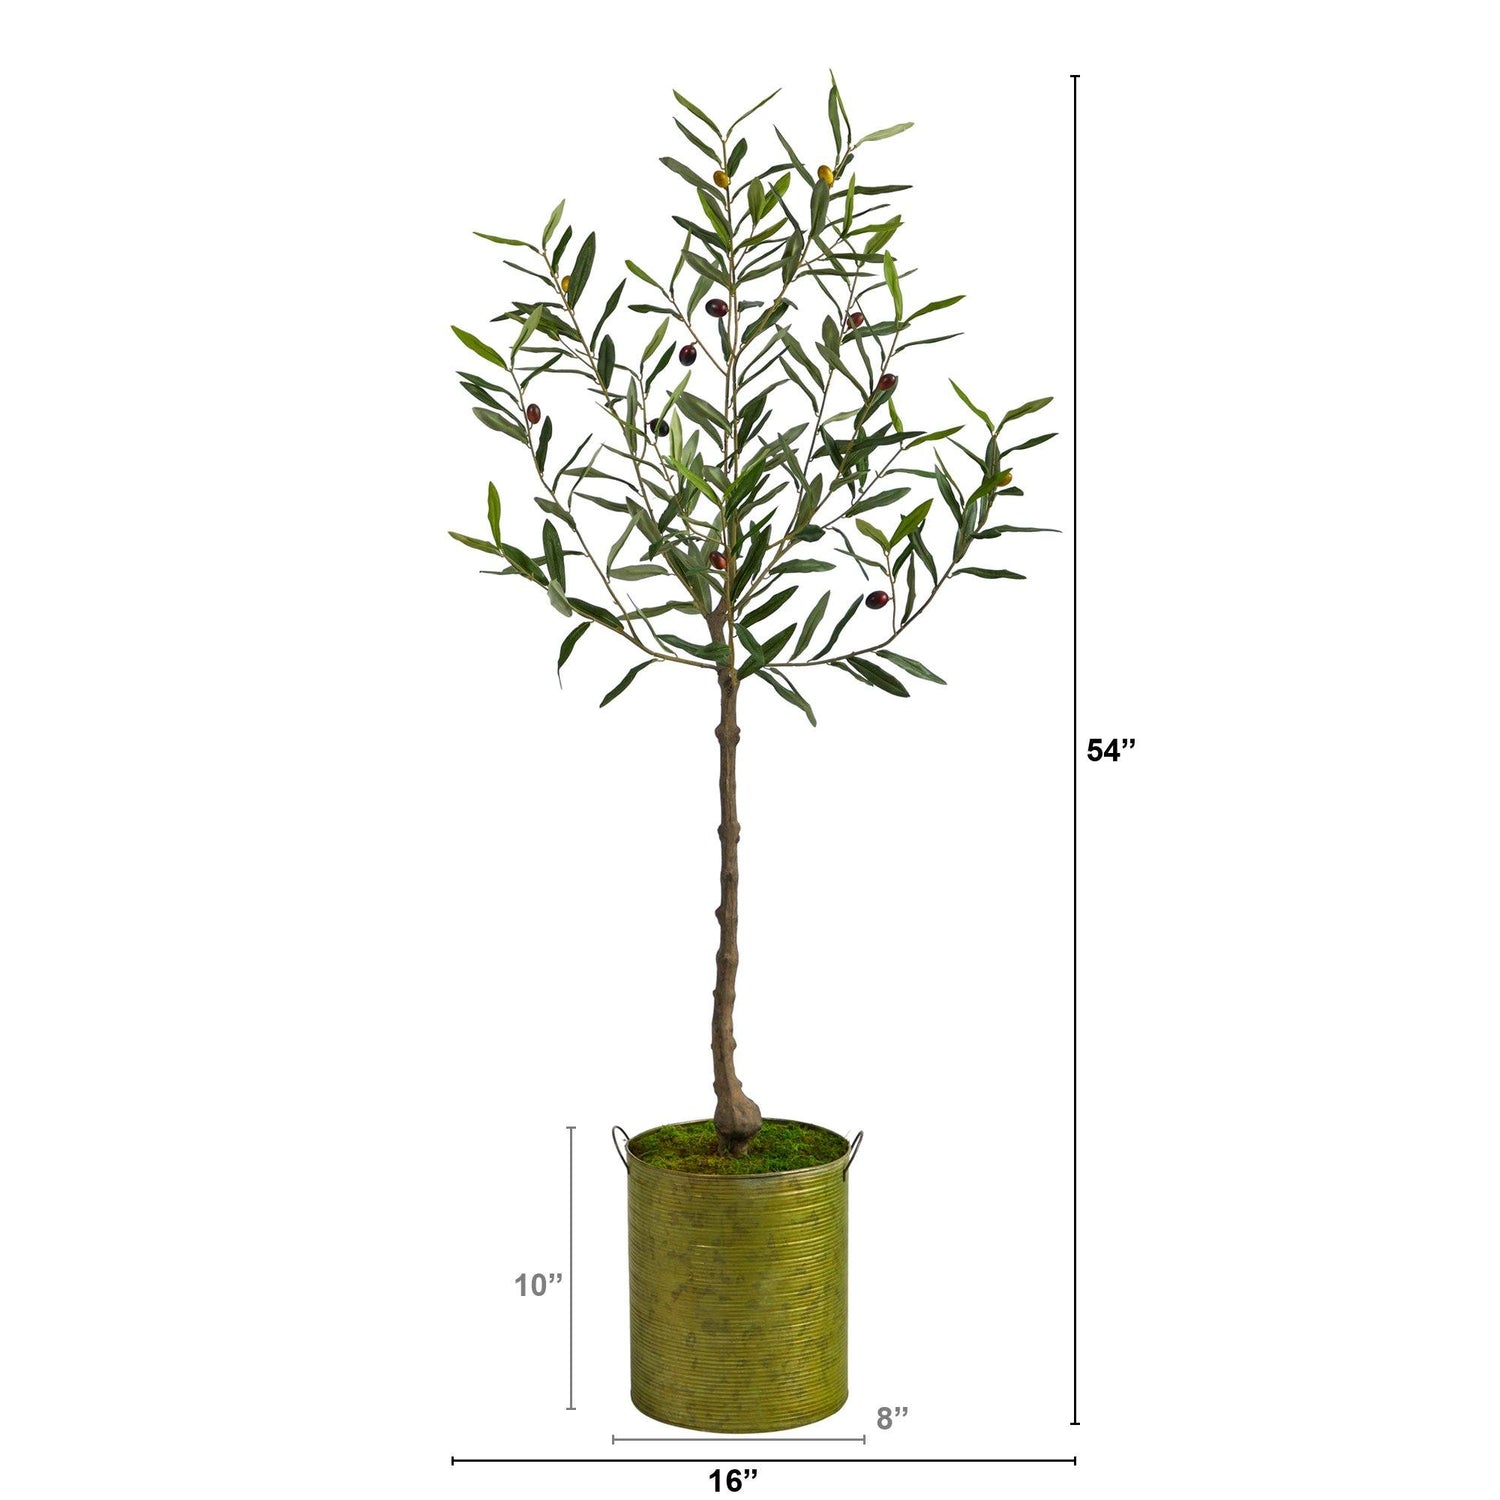 4.5’ Olive Artificial Tree in Green Planter